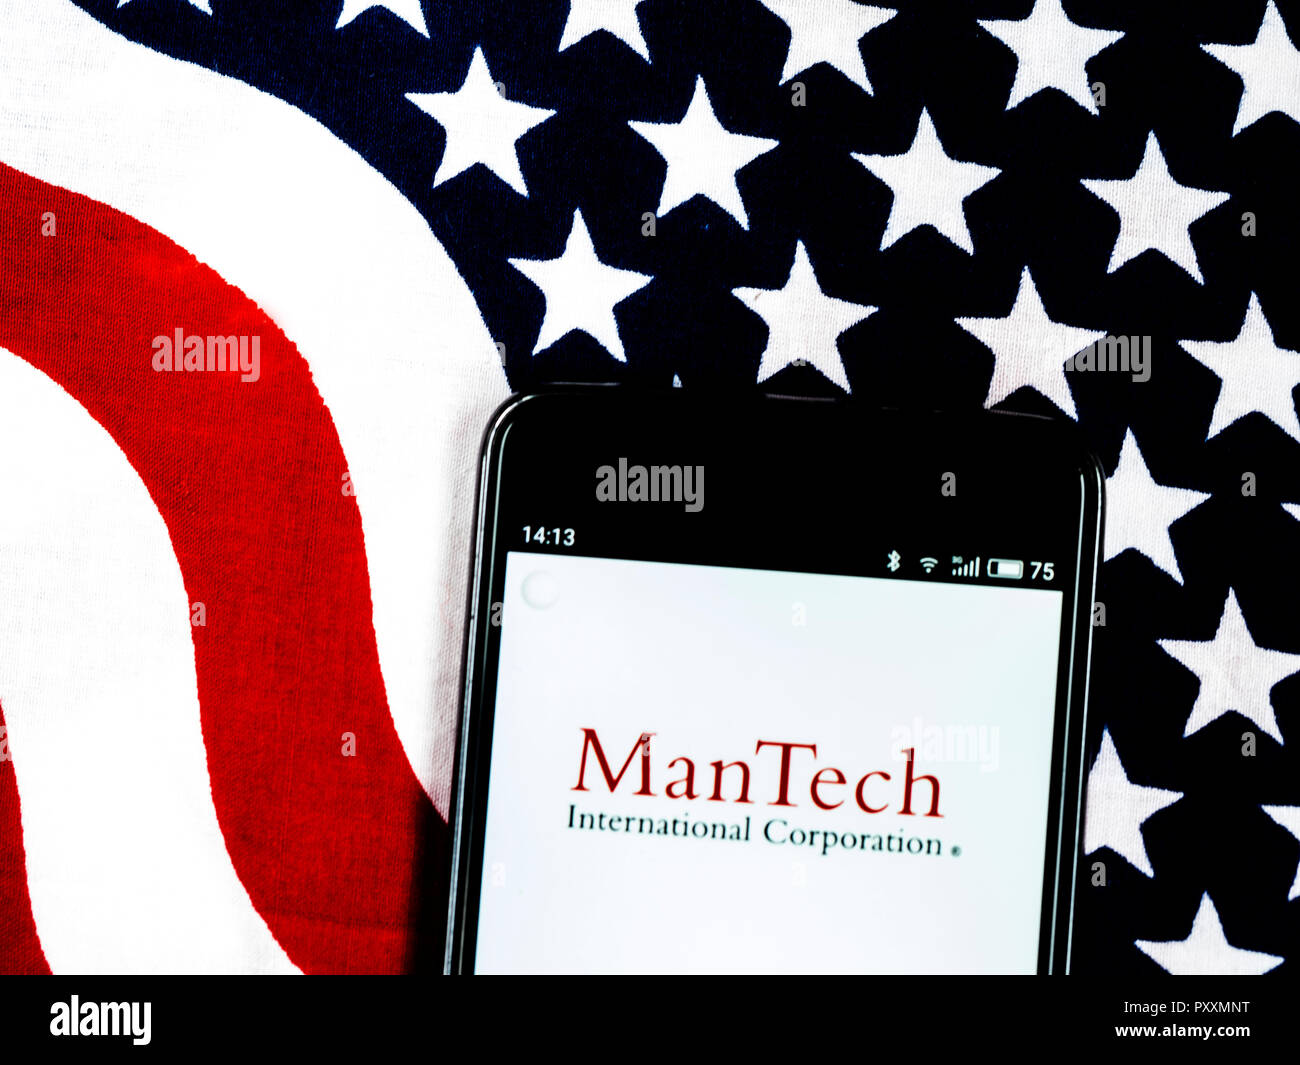 ManTech International logo seen displayed on smart phone. ManTech International Corporation uses advanced technology to help government and industry manage and protect information, support and maintain critical systems, and develop integrated systems to handle complex needs. Stock Photo